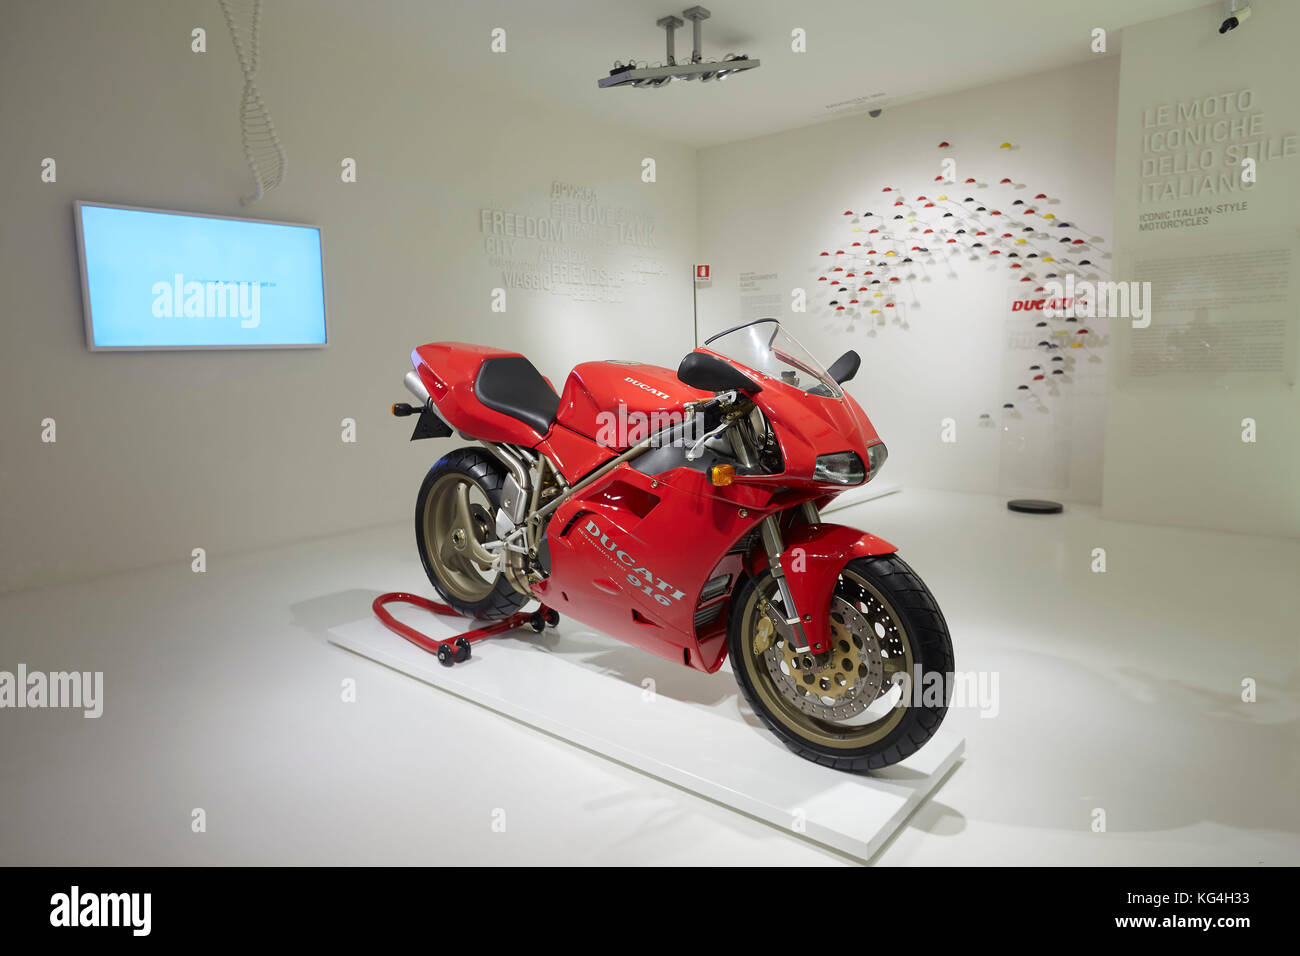 Ducati classic 916 Motorcycle on display at the Ducati factory museum, Bologna, Italy. Stock Photo